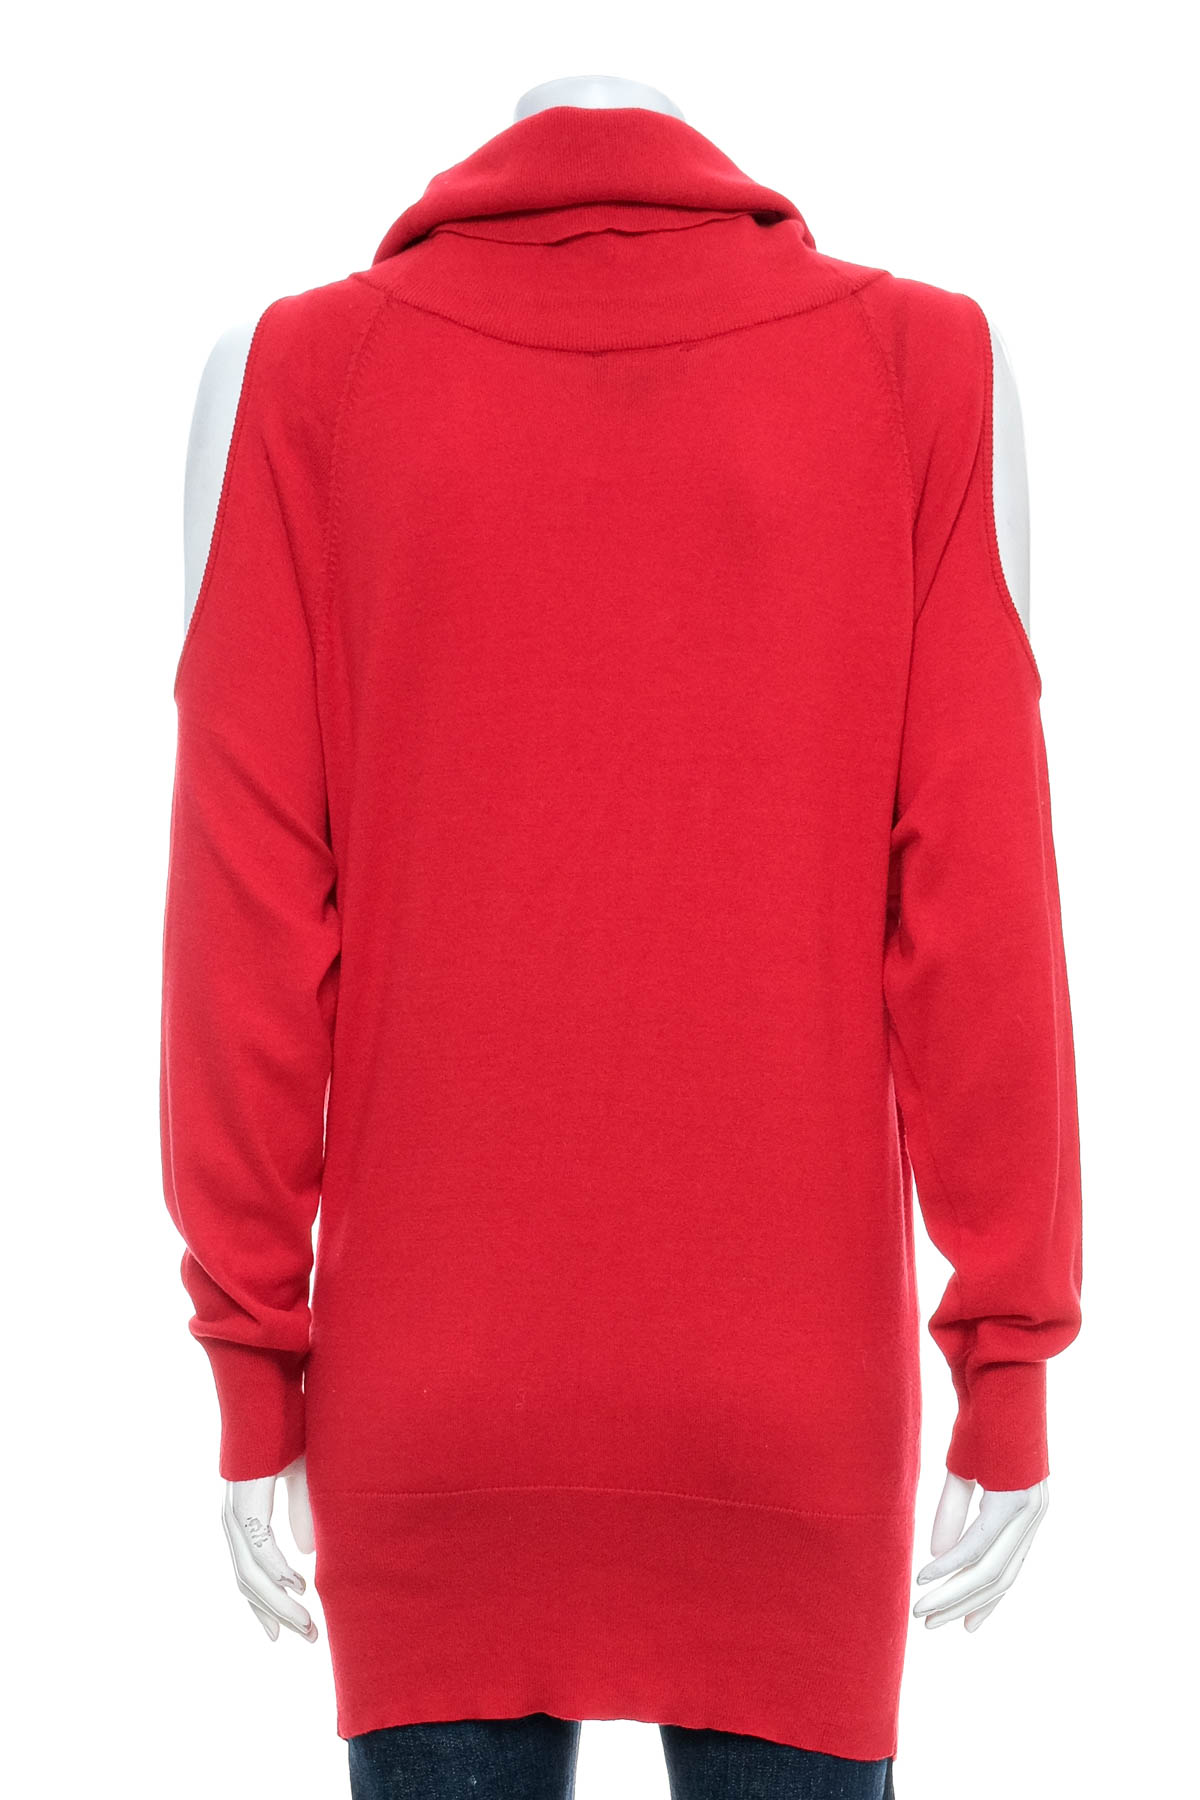 Women's sweater - THE LIMITED - 1